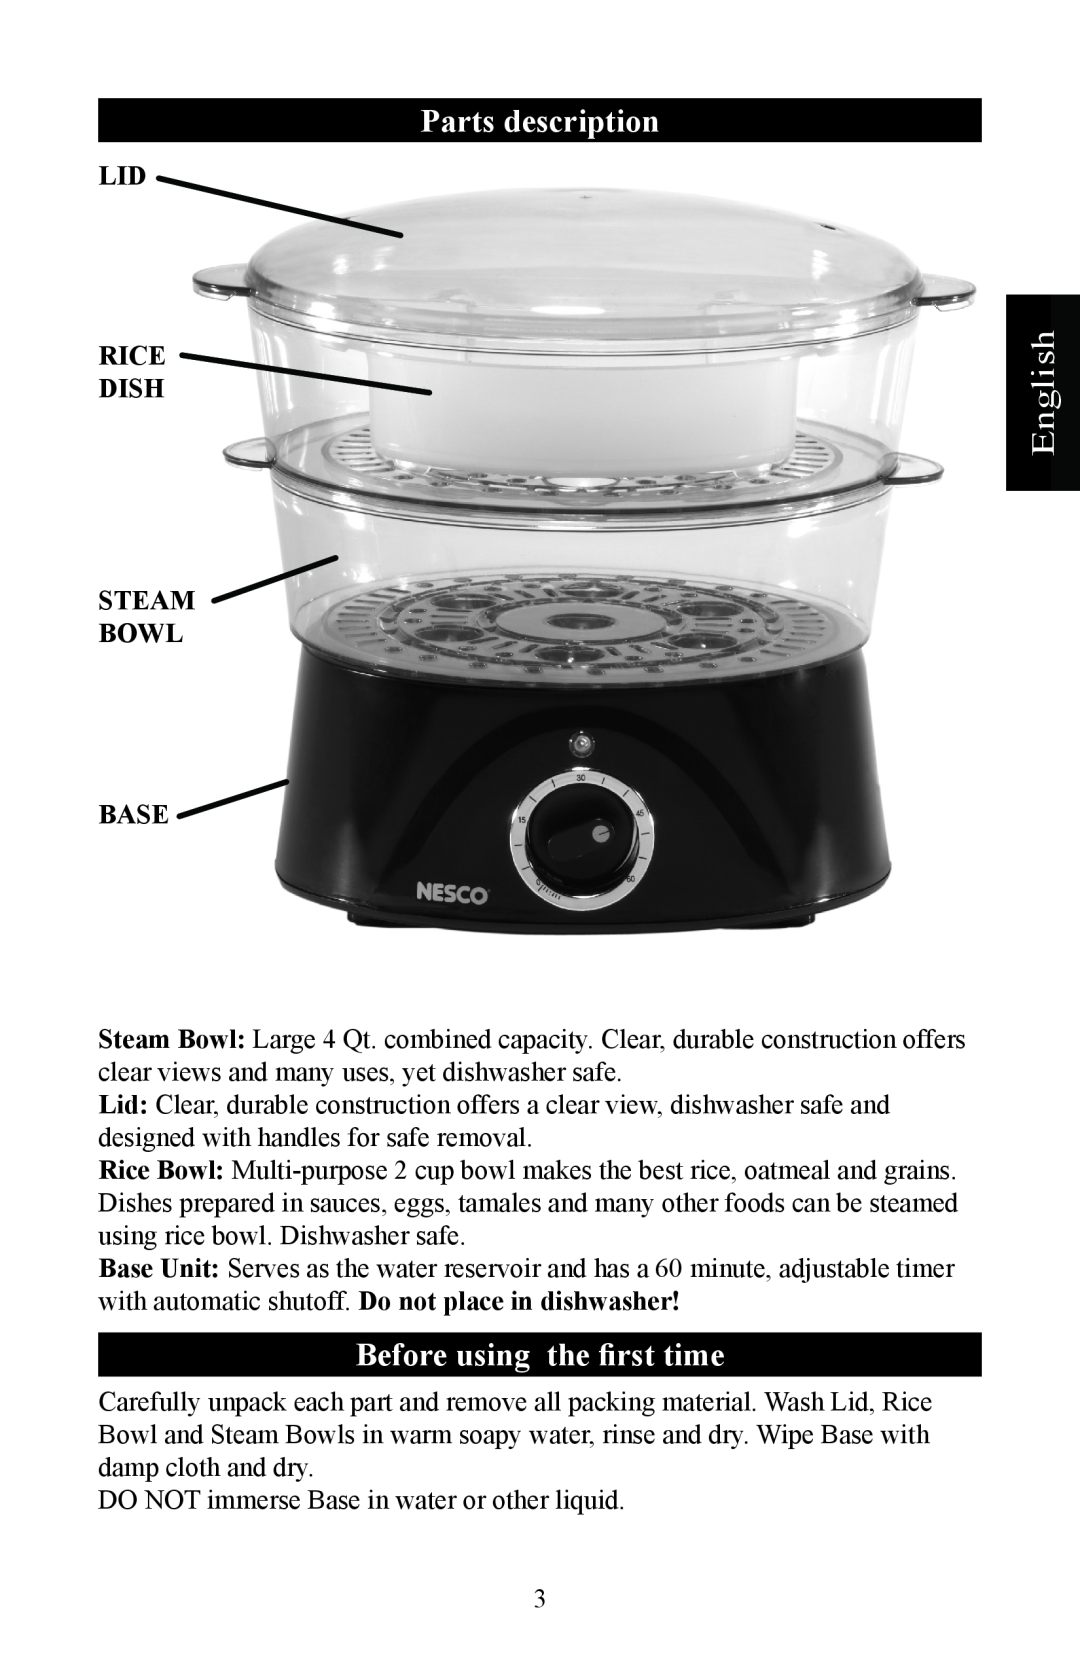 Nesco ST-24 manual Parts description, Before using the first time, English, Lid Rice Dish Steam Bowl Base 